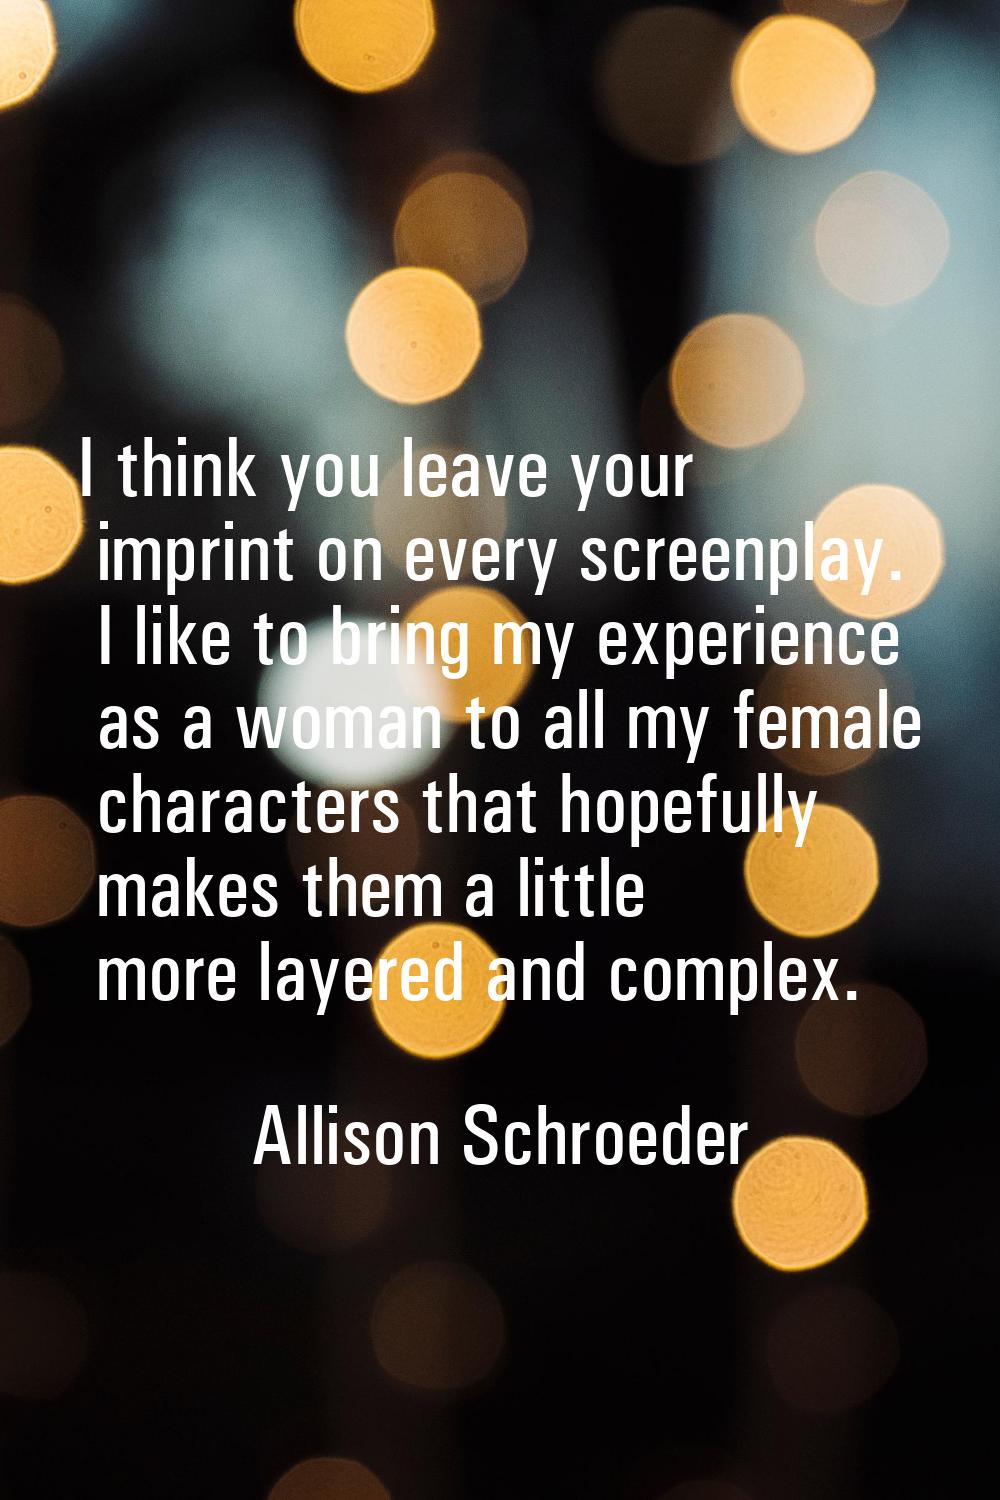 I think you leave your imprint on every screenplay. I like to bring my experience as a woman to all